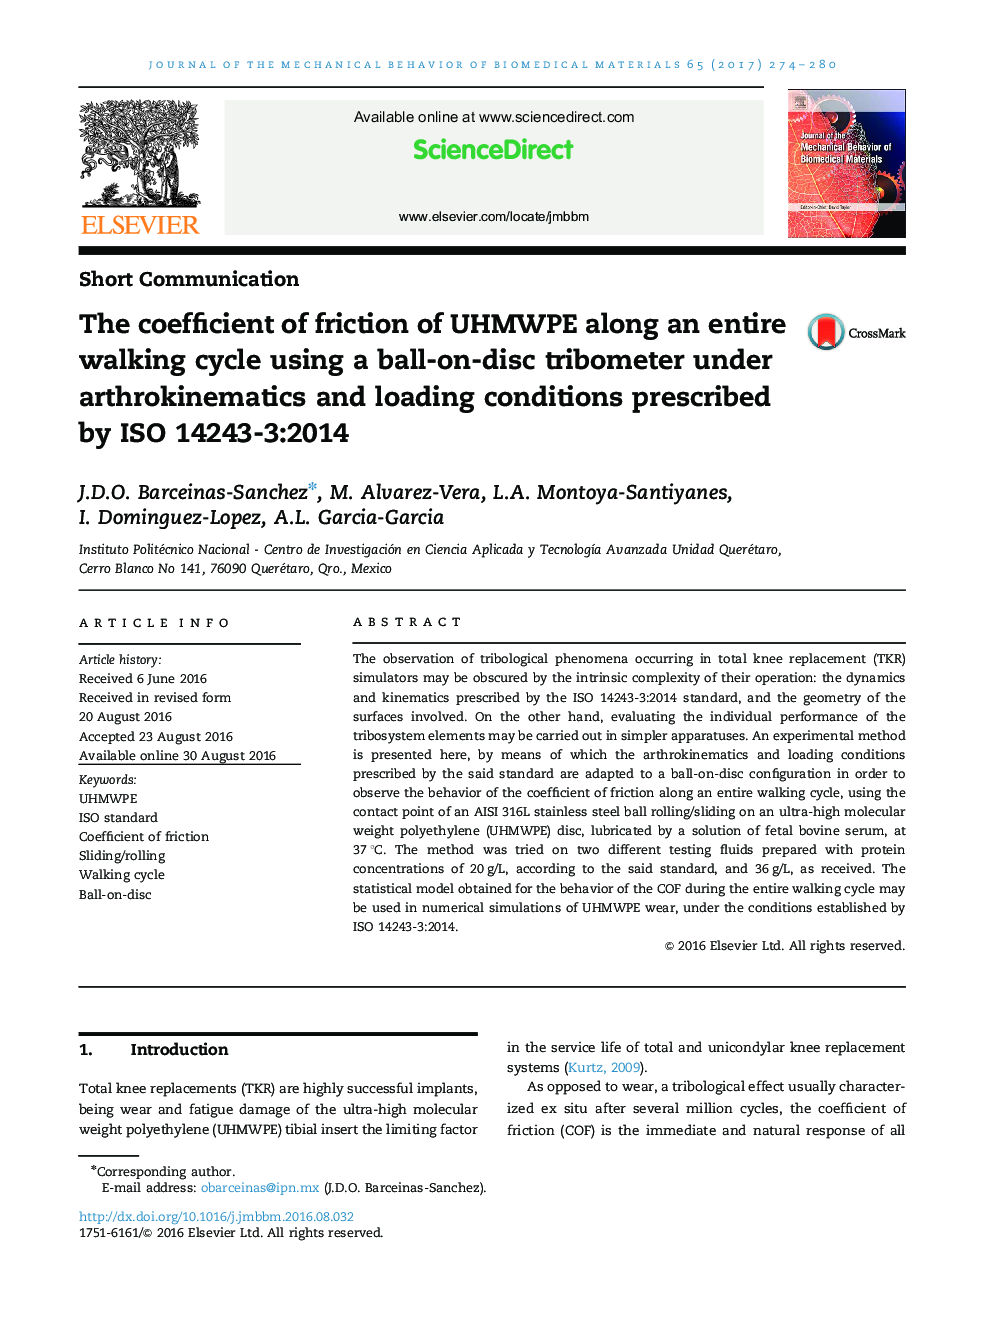 The coefficient of friction of UHMWPE along an entire walking cycle using a ball-on-disc tribometer under arthrokinematics and loading conditions prescribed by ISO 14243-3:2014